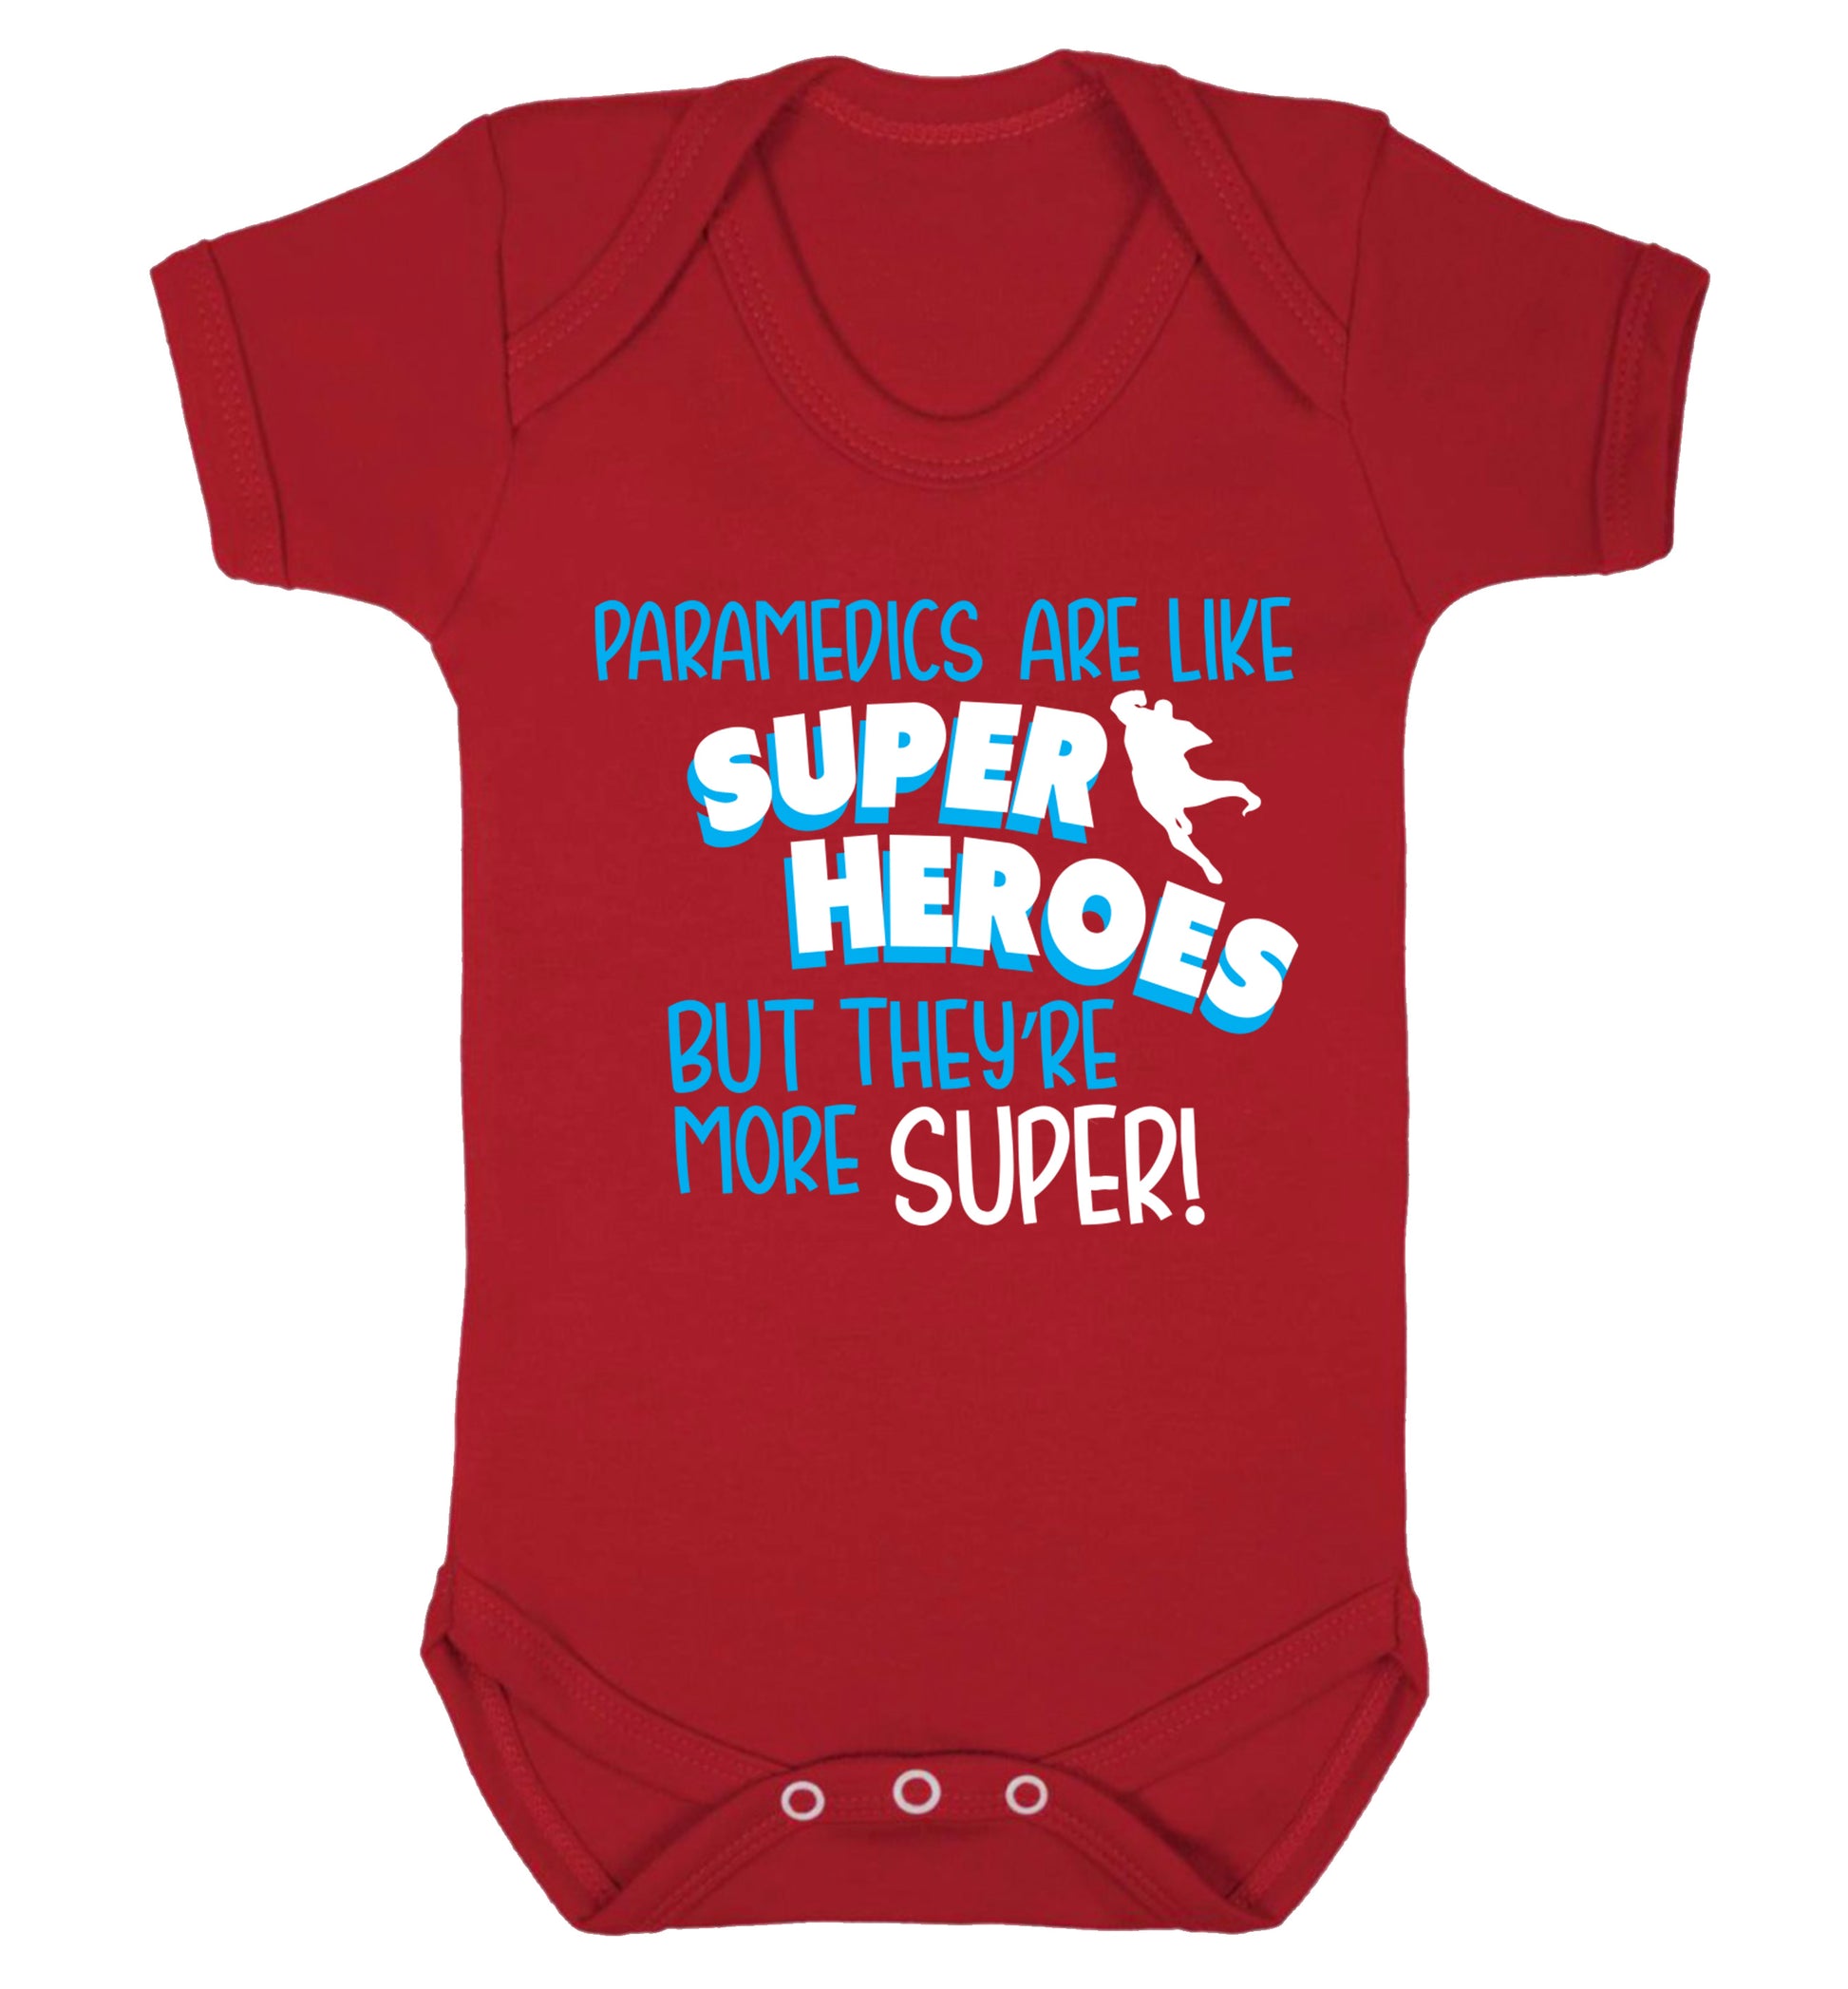 Paramedics are like superheros but they're more super Baby Vest red 18-24 months